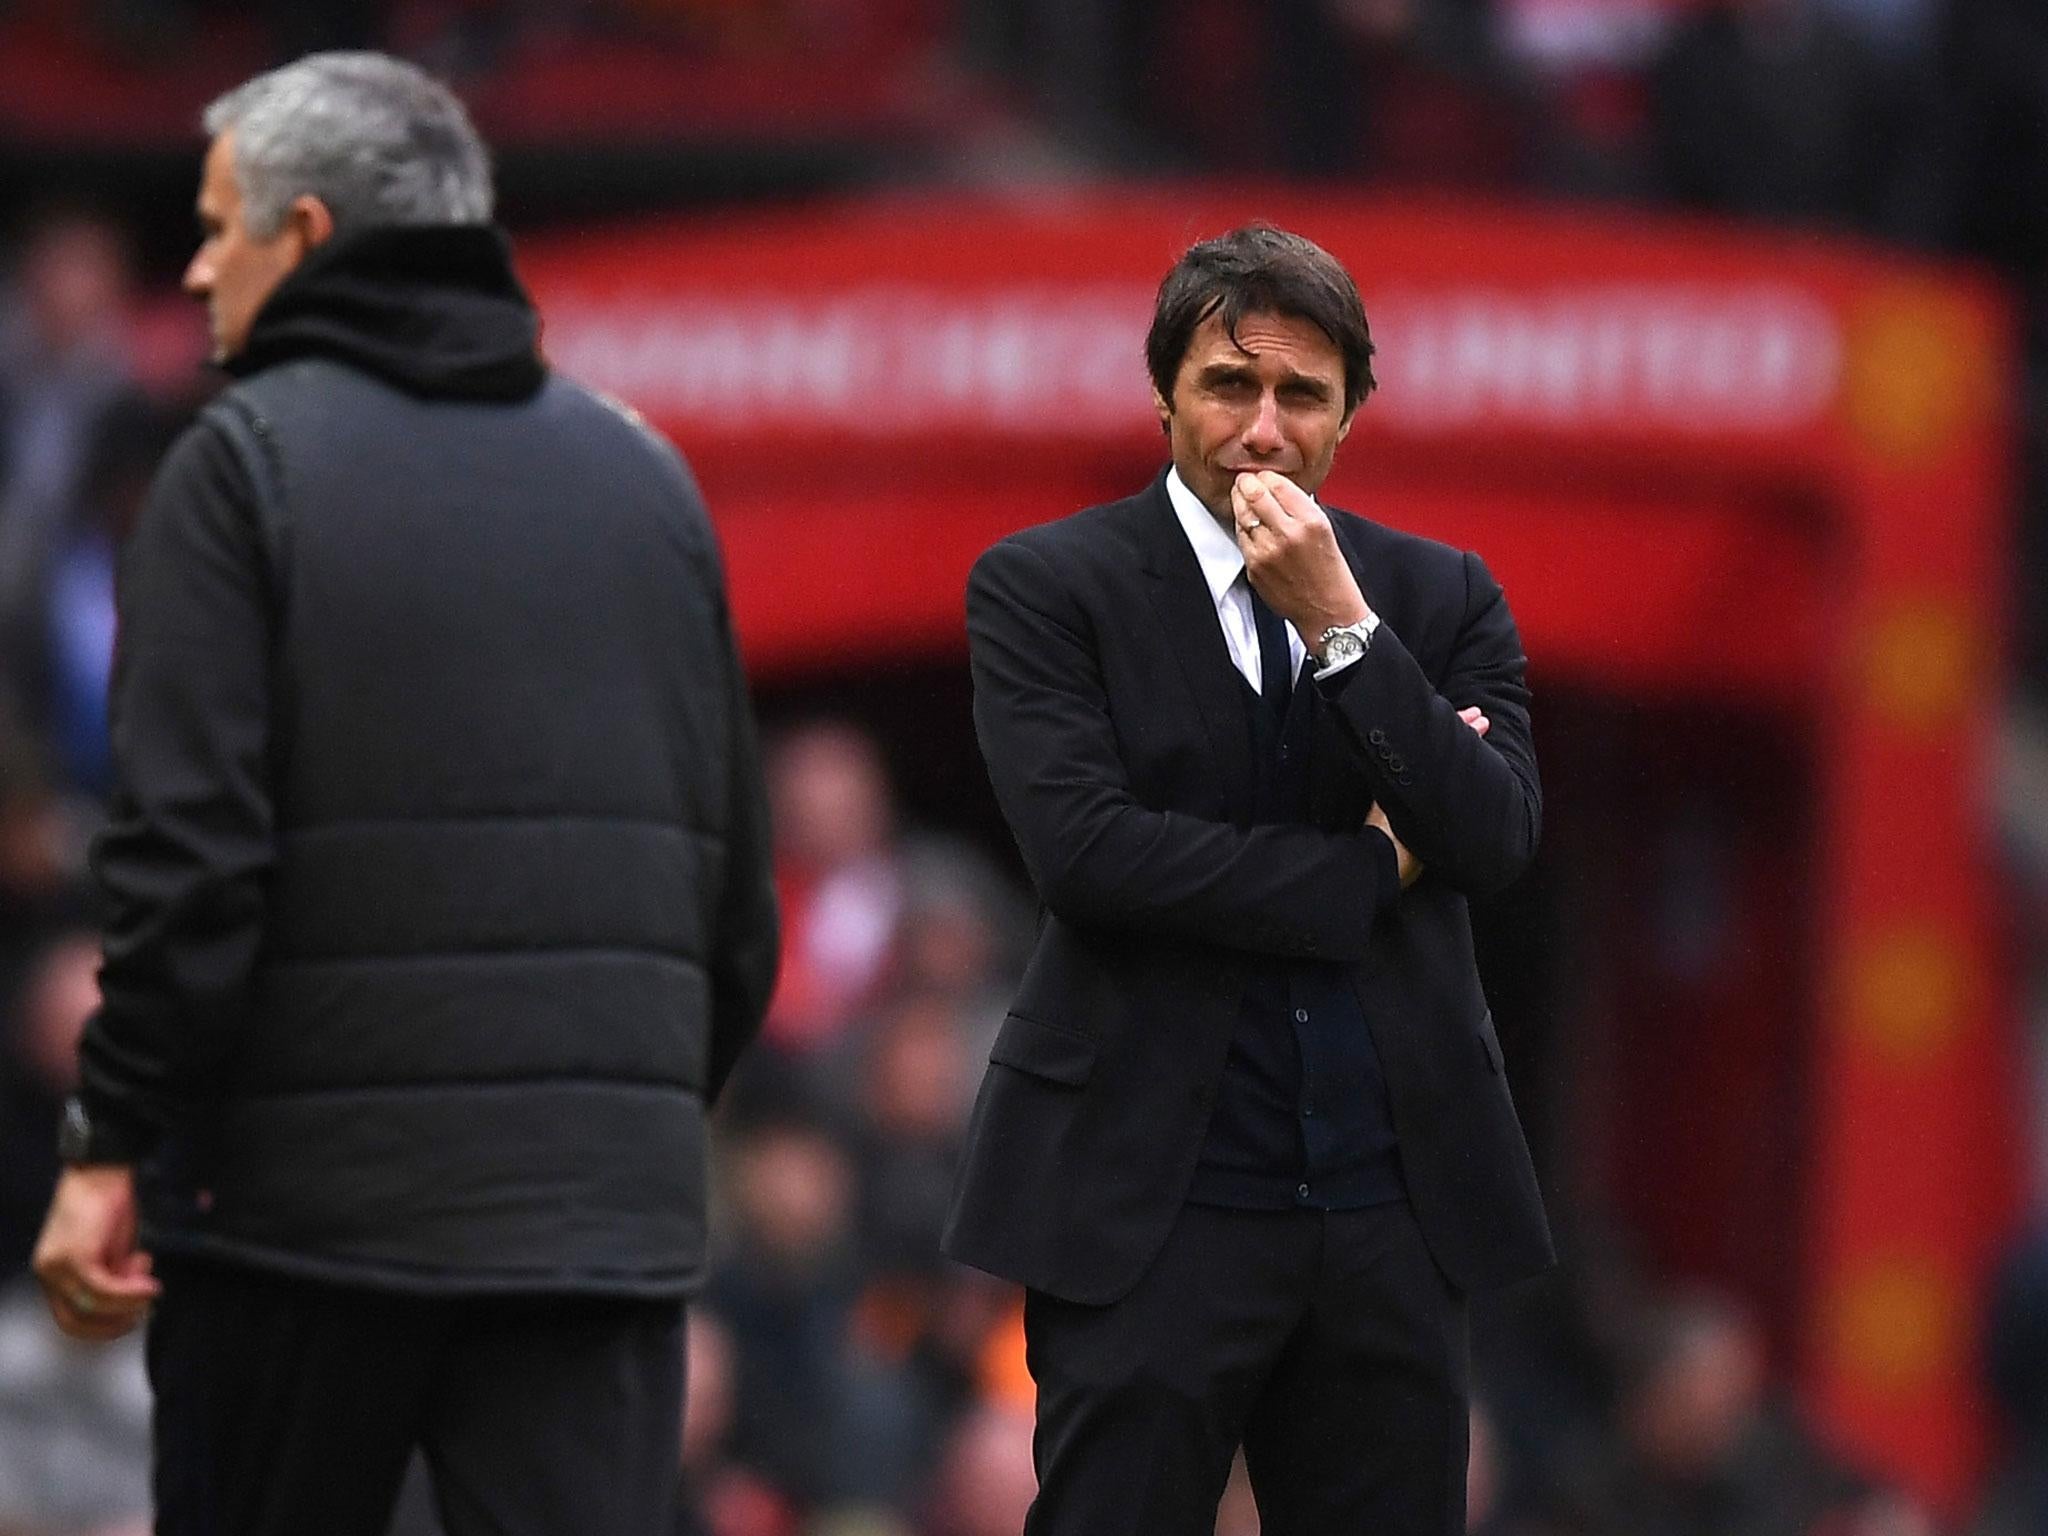 Antonio Conte lacked the energy and passion that he has displayed all season during Chelsea's loss to United